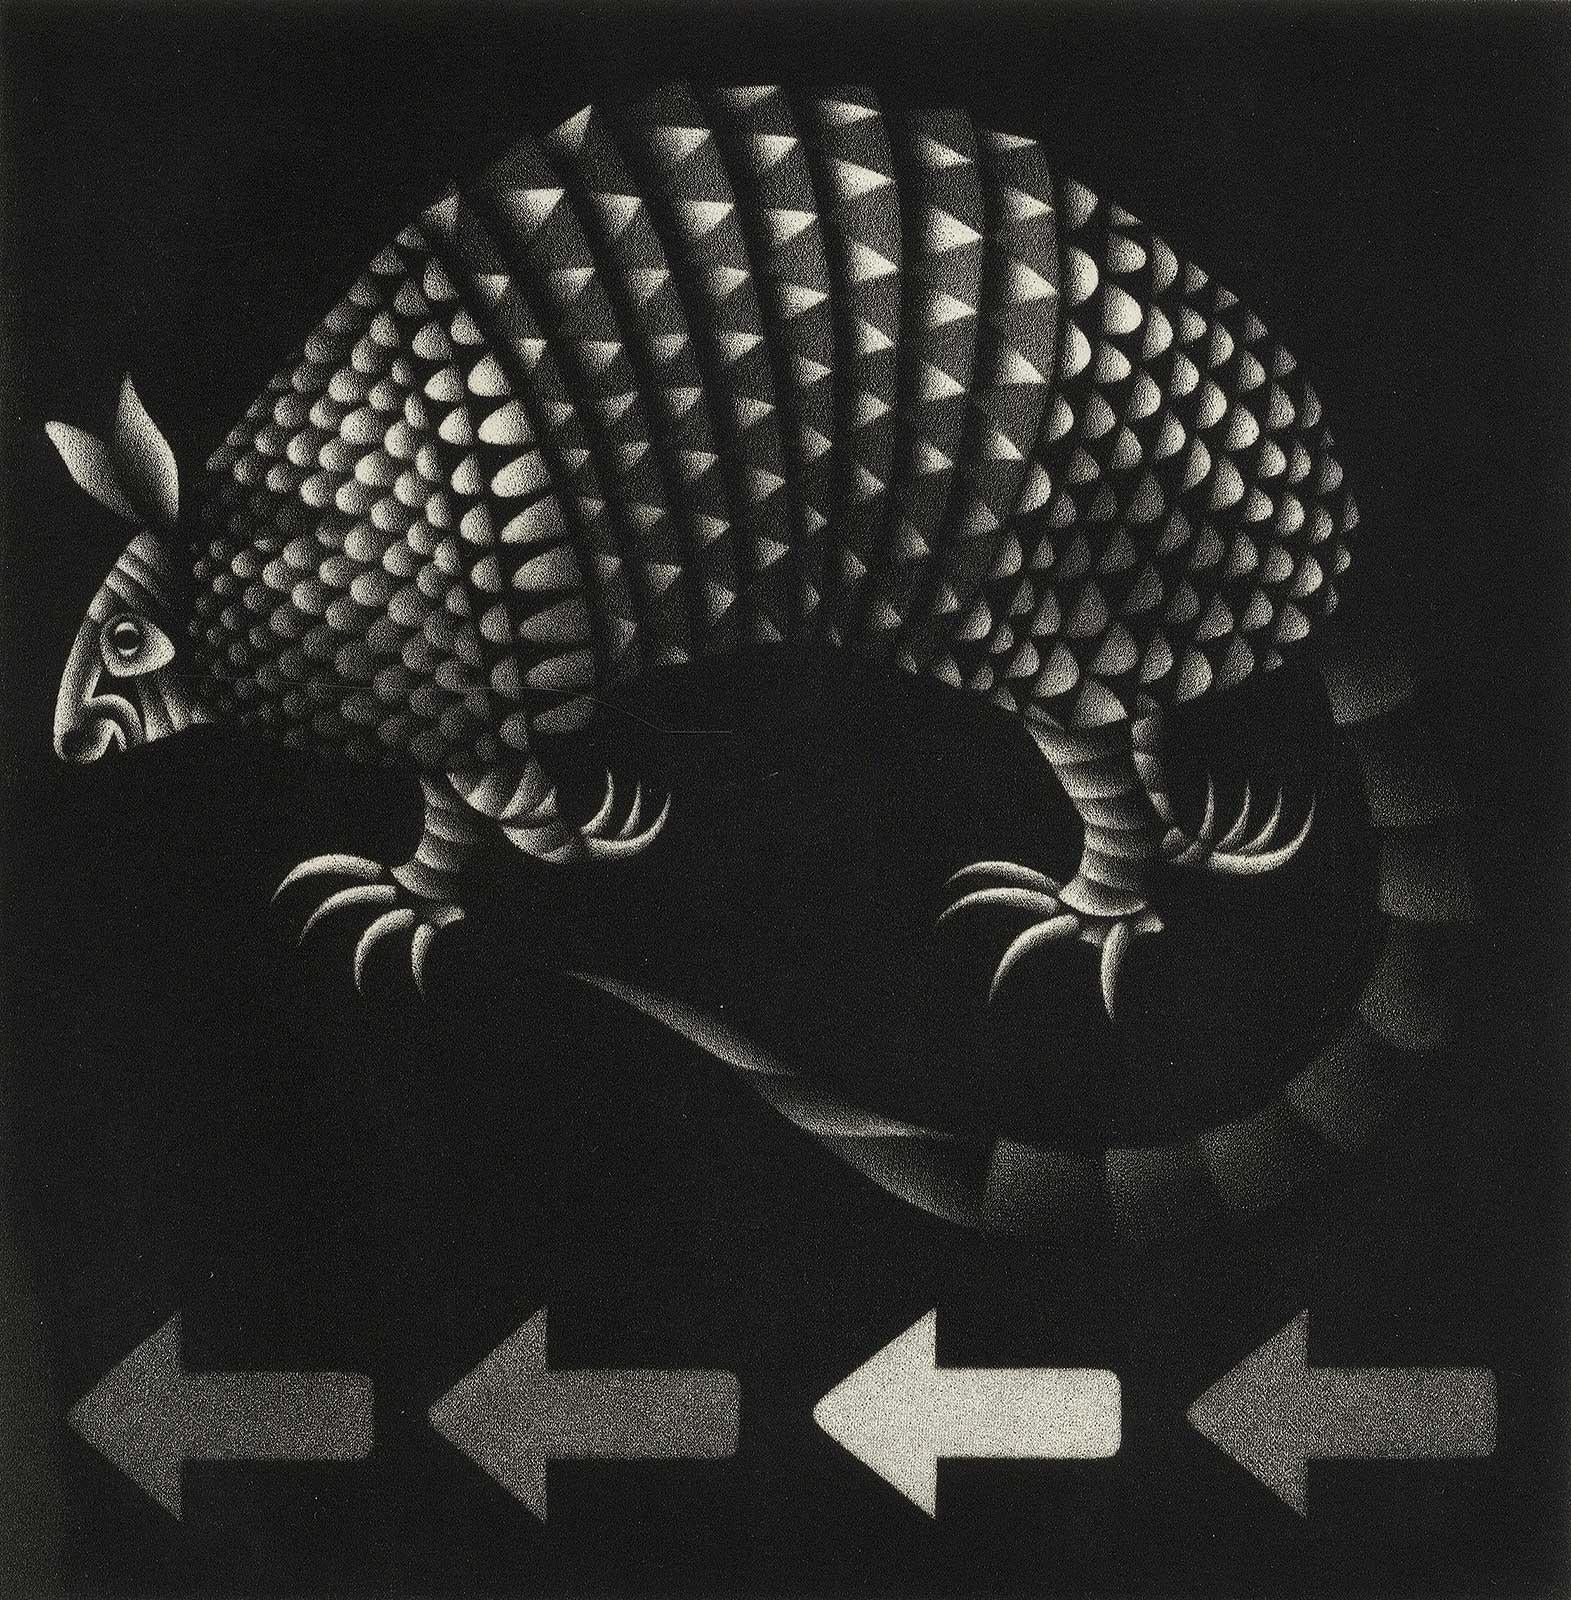 Mario Avati Animal Print - Armadillo (the "little armored one" of the highway - only living shelled mammal)